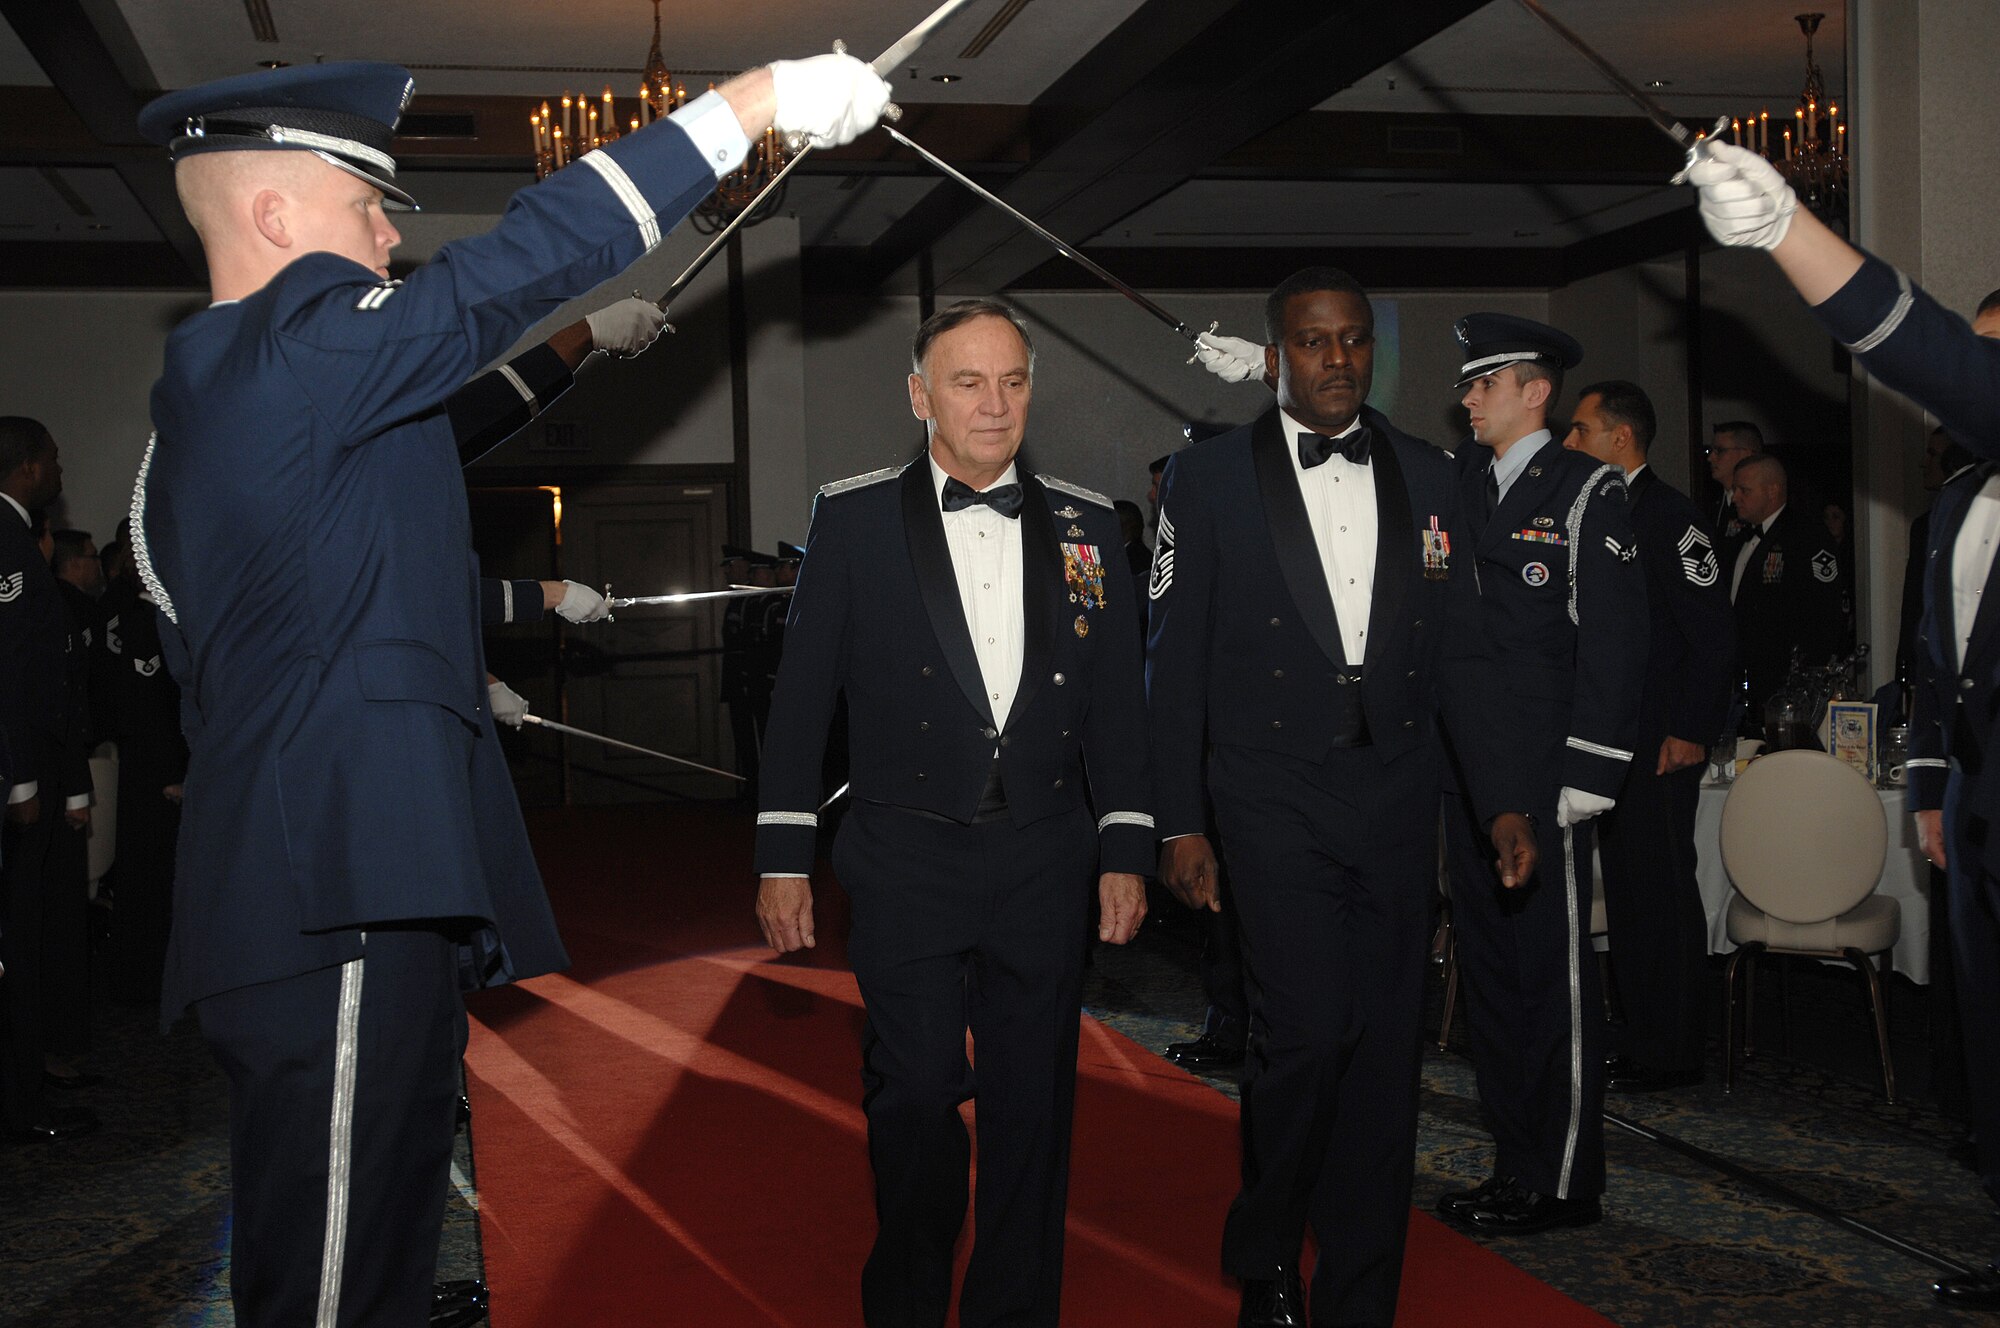 U.S. Air Forces in Europe Commander, General William T. Hobbins arrives for a USAFE order of the sword induction ceremony in his honor along with USAFE Command Chief Master Sergeant Gary G. Coleman, who’s also chief master sergeant of the mess for the ceremony.  The order of the sword induction is the highest honor the enlisted corps can bestow on an individual. (U.S. Air Force photo by Airman First Class Kenny Holston)